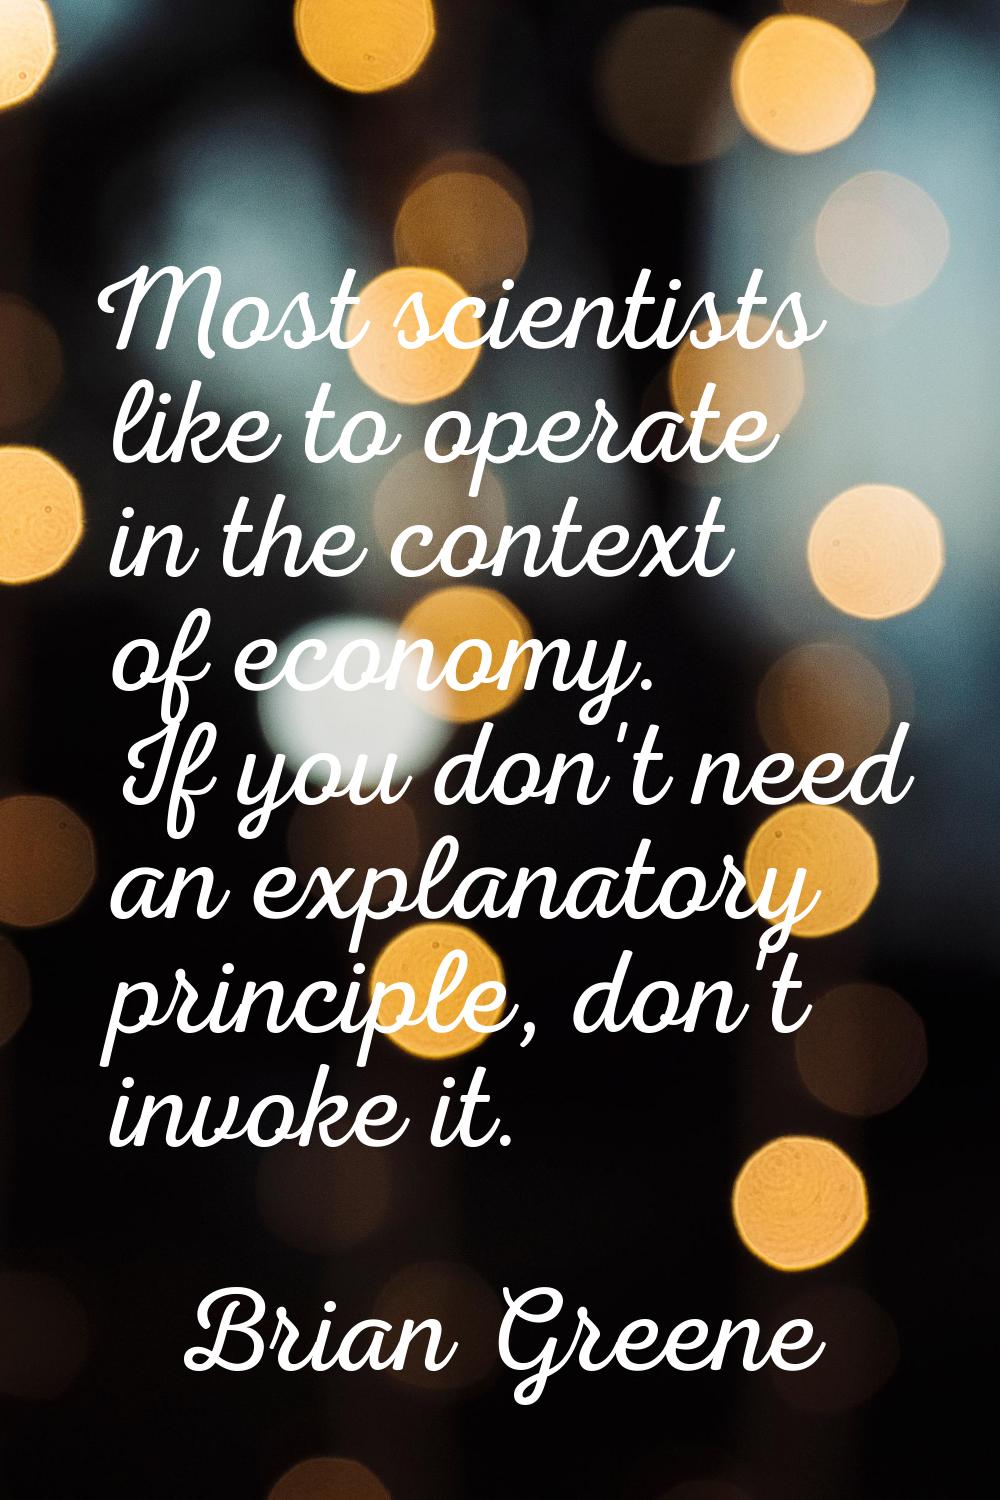 Most scientists like to operate in the context of economy. If you don't need an explanatory princip